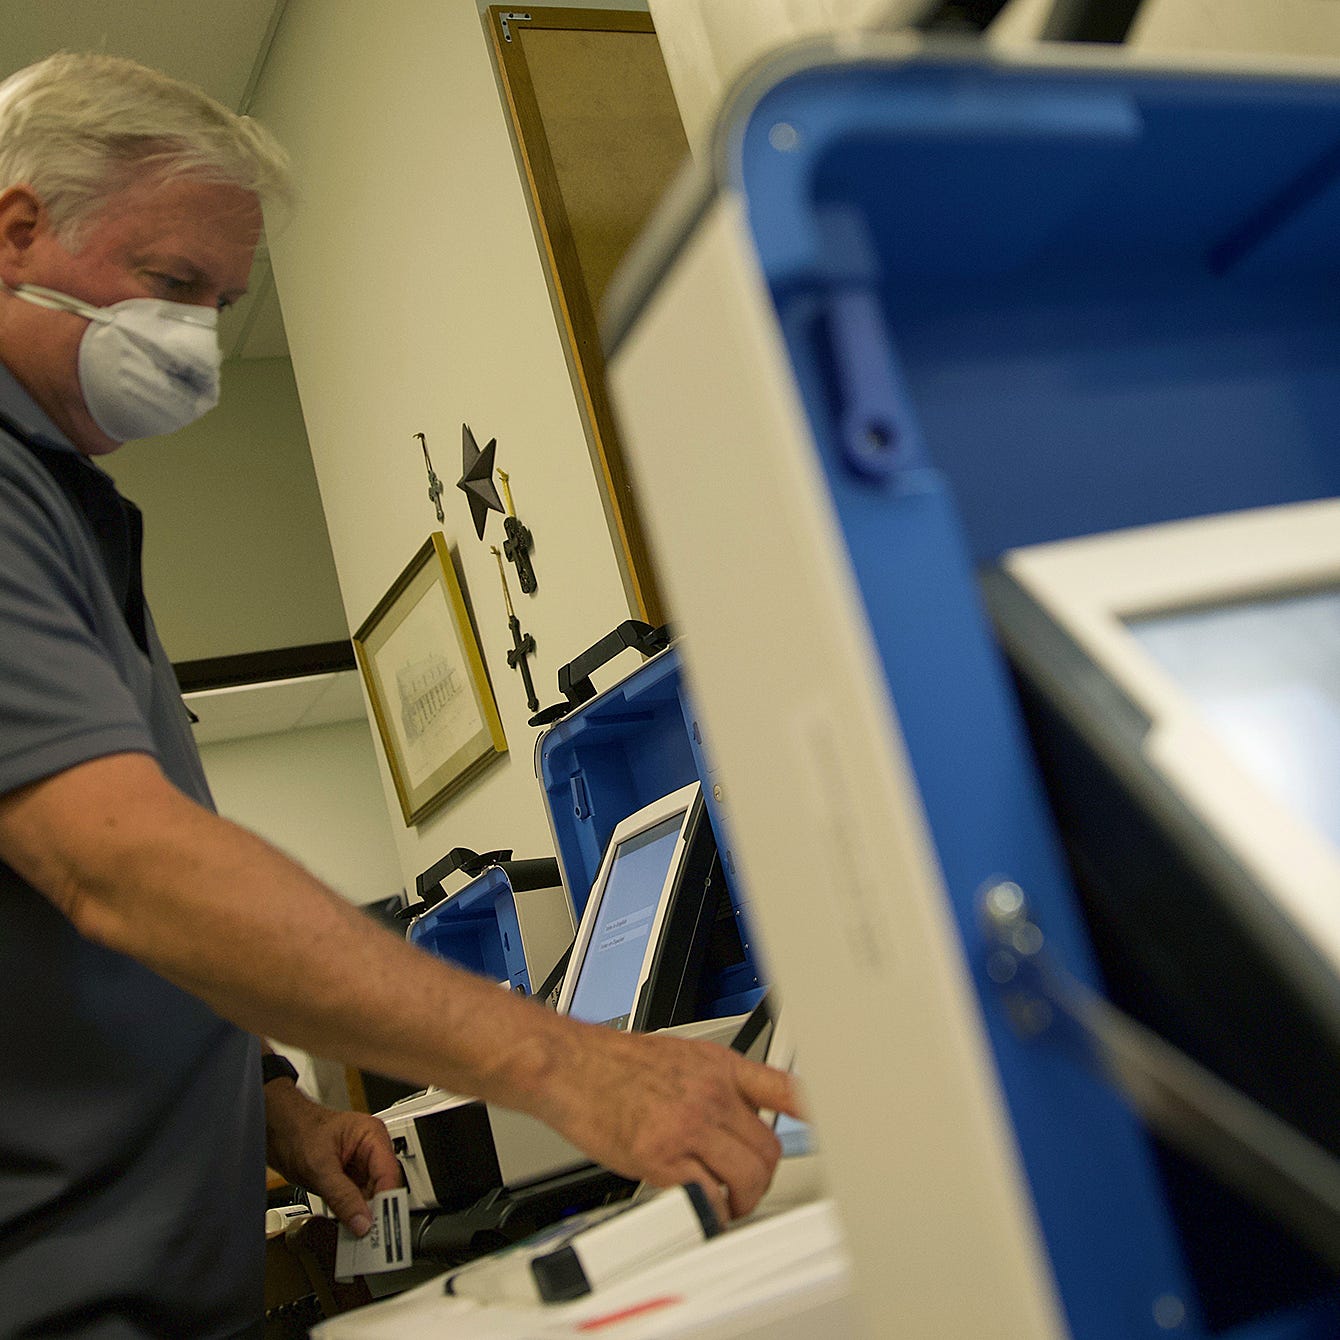 Johnny Fisher works with voting machines at the Tom Green County election office on Wednesday, June 24, 2020.